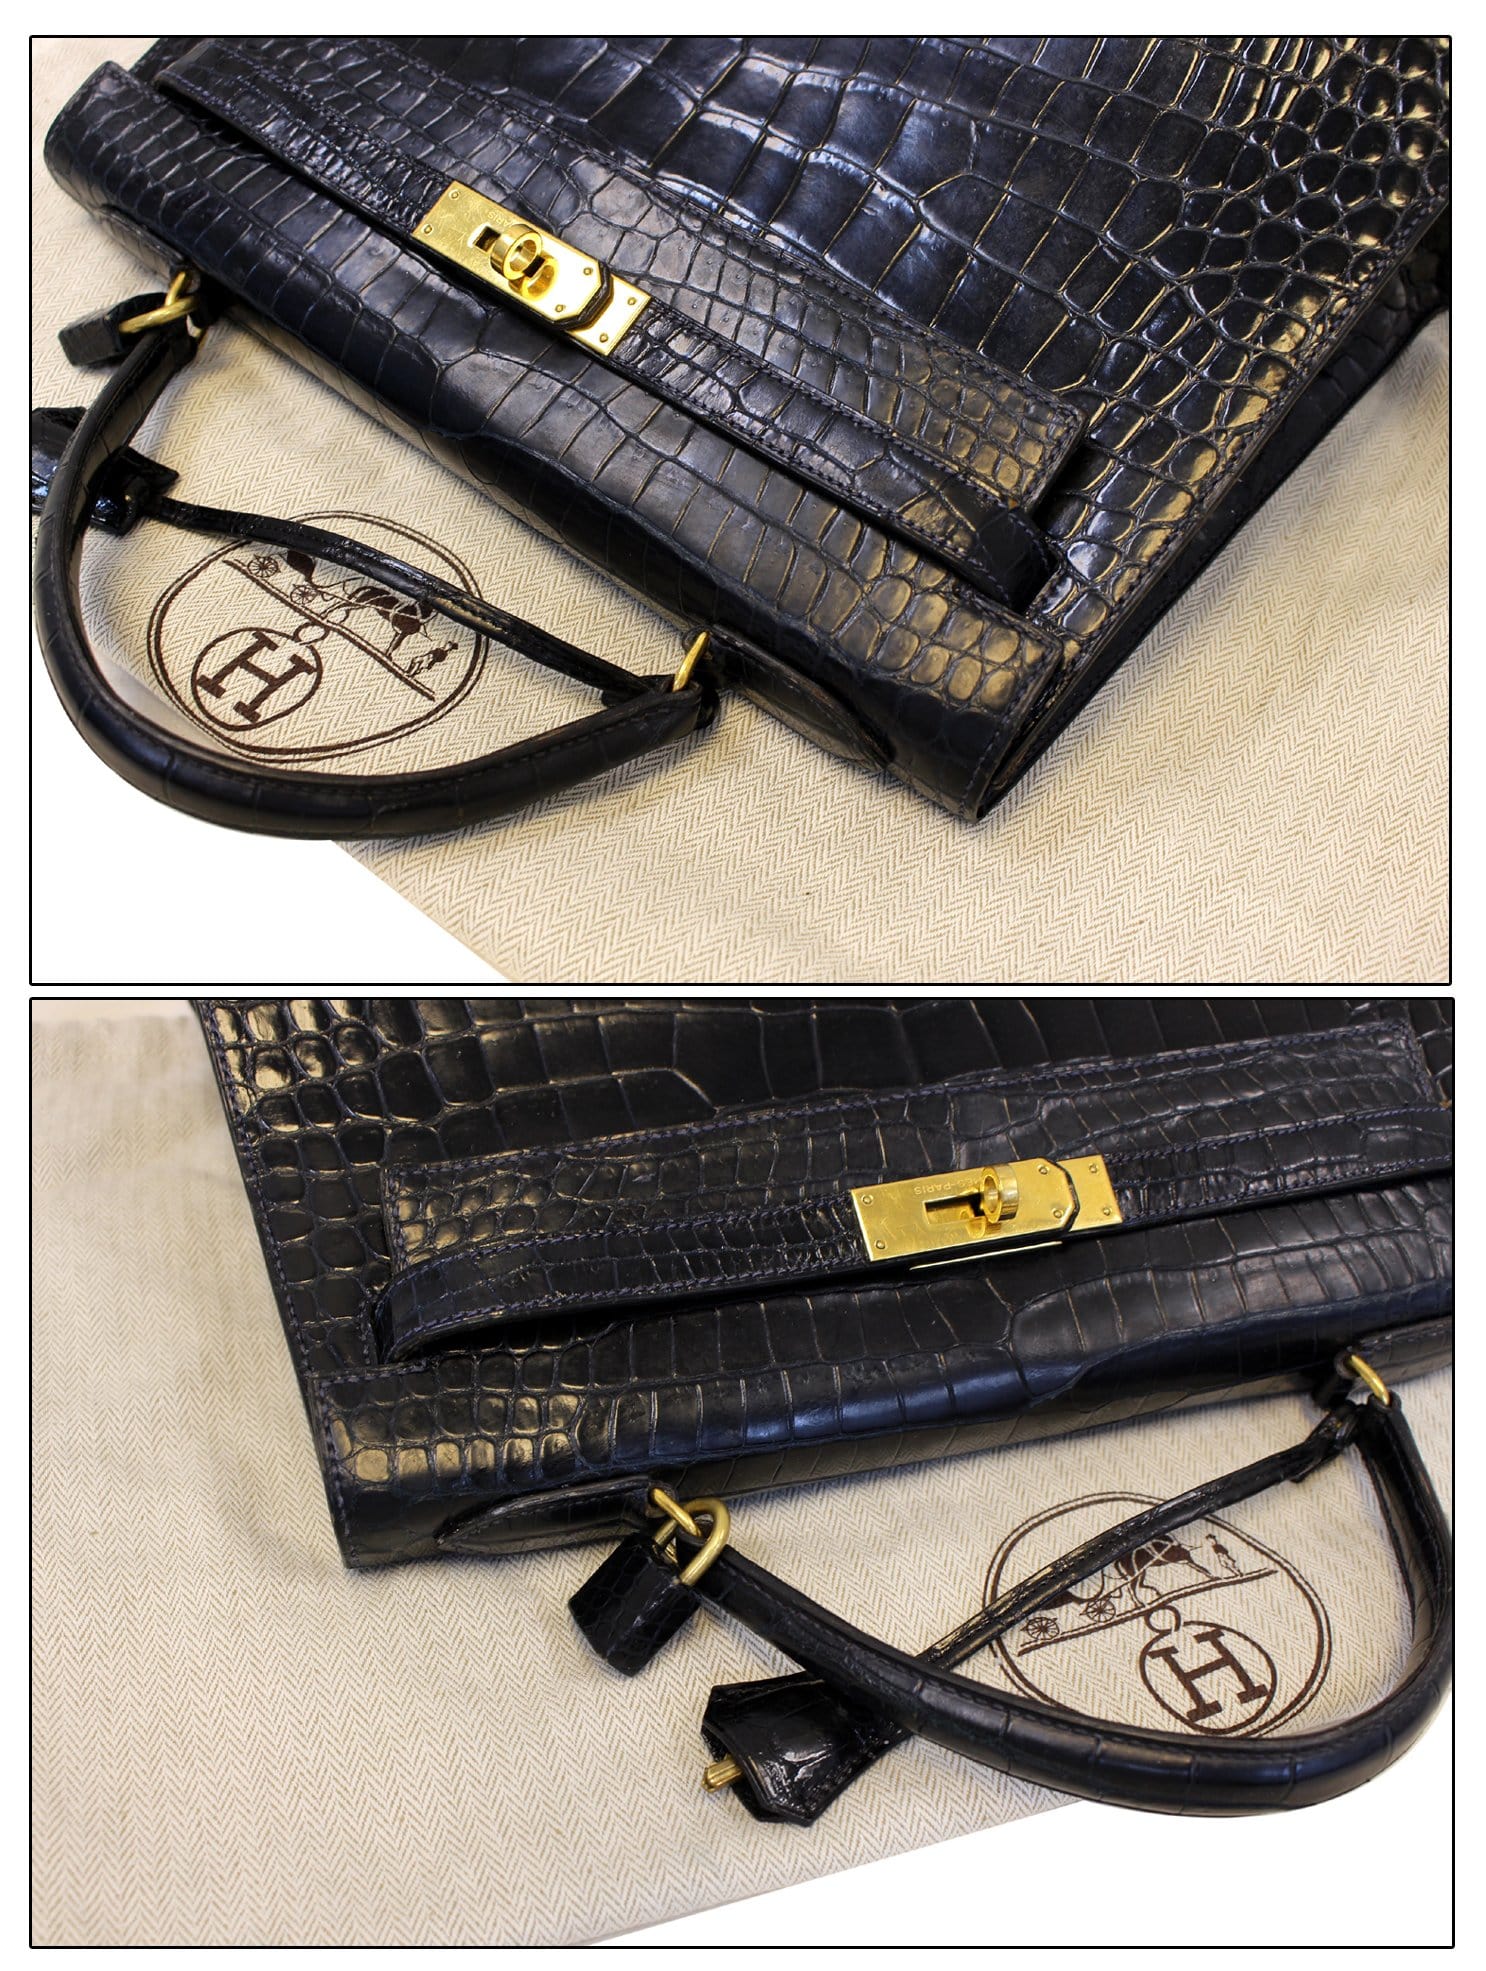 The H Place product - Hermes Kelly 32 Black Crocodile